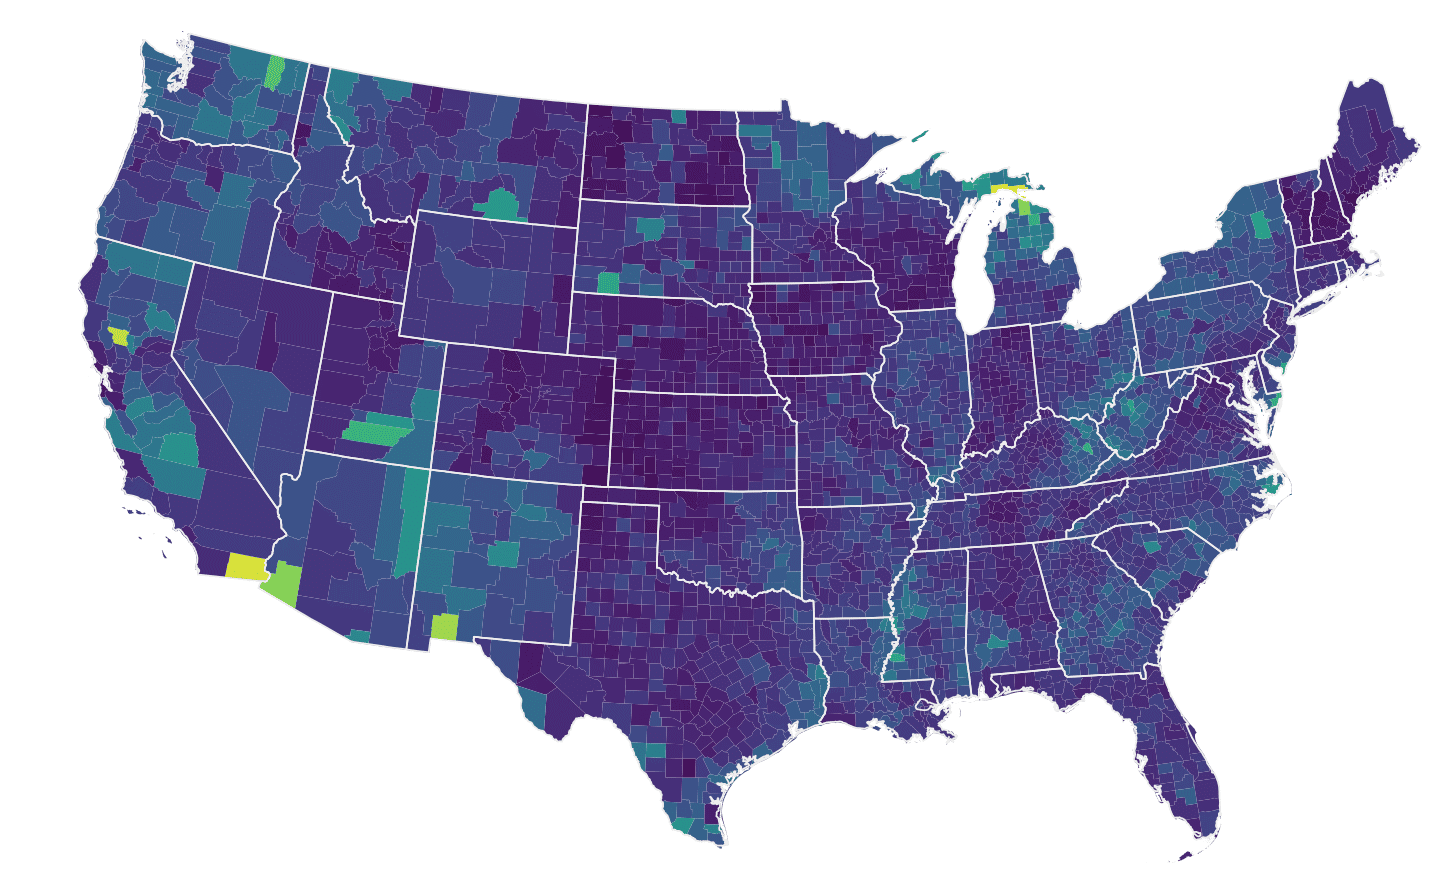 A detailed map of the USA that shows how ggplot2 can create complex data visualizations.